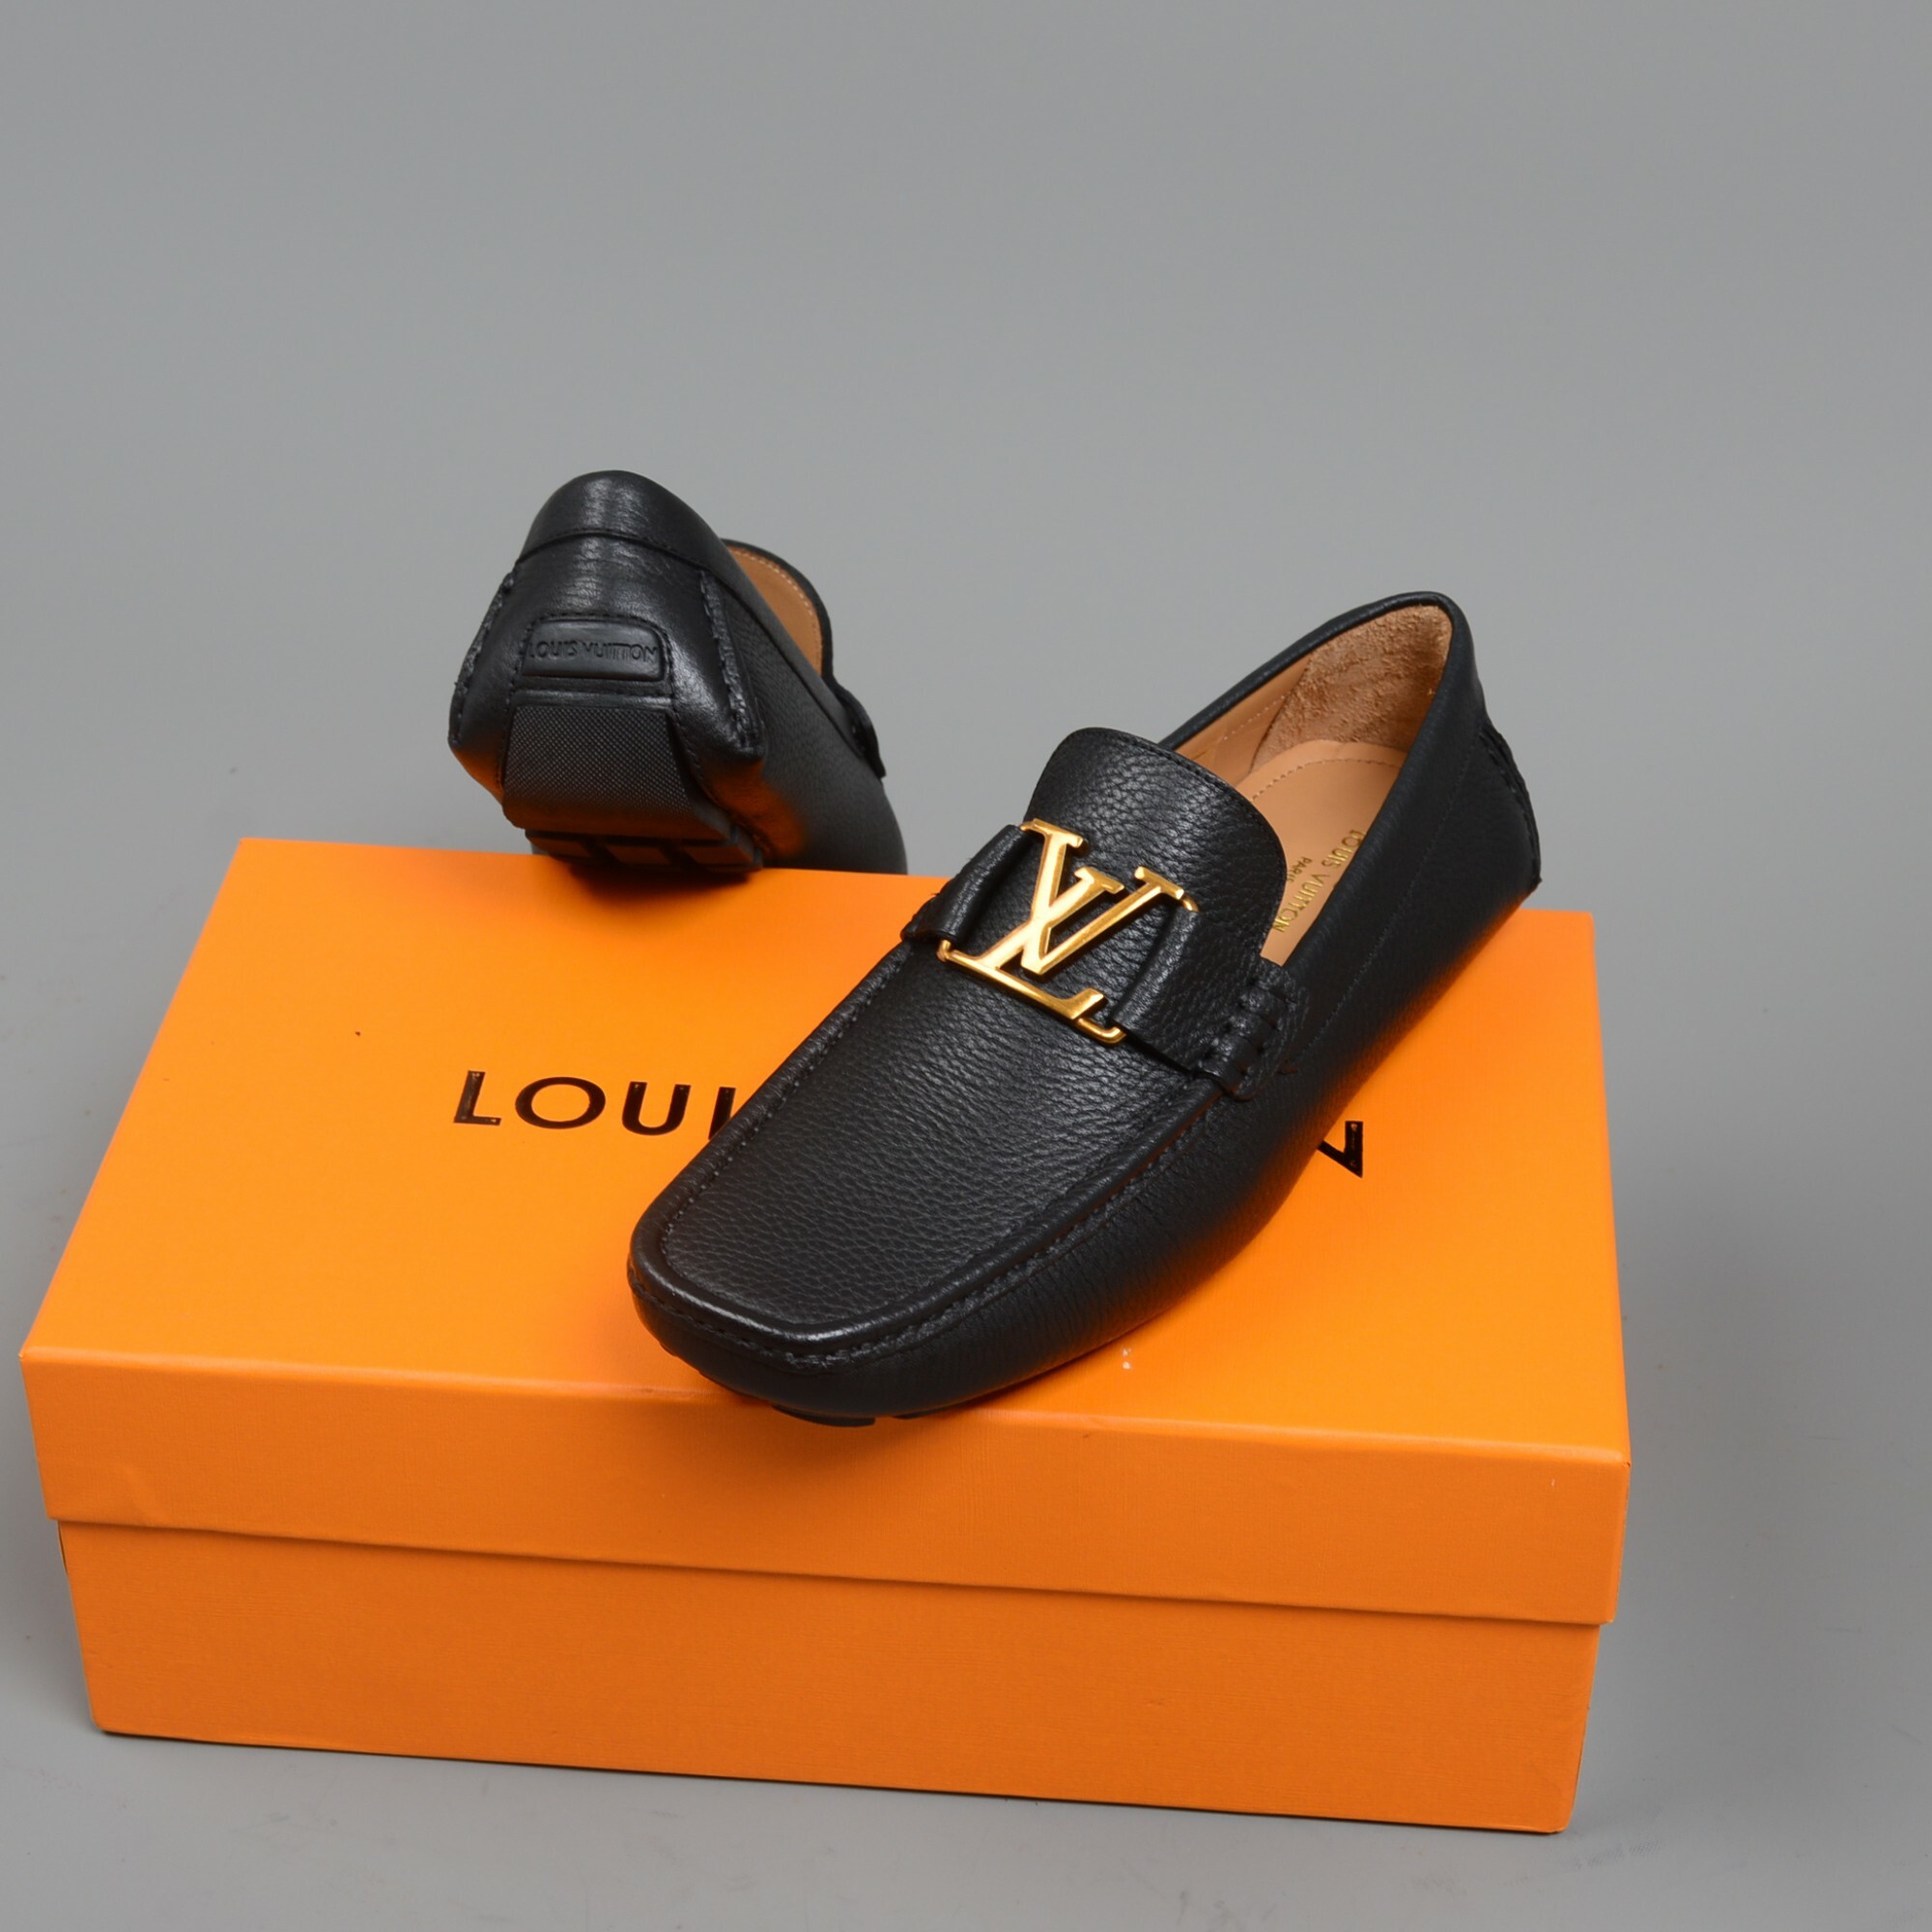 LOUIS VUITTON MOCCASIN SHOES 10 44 MONTE CARLO NAVY BLUE LEATHER